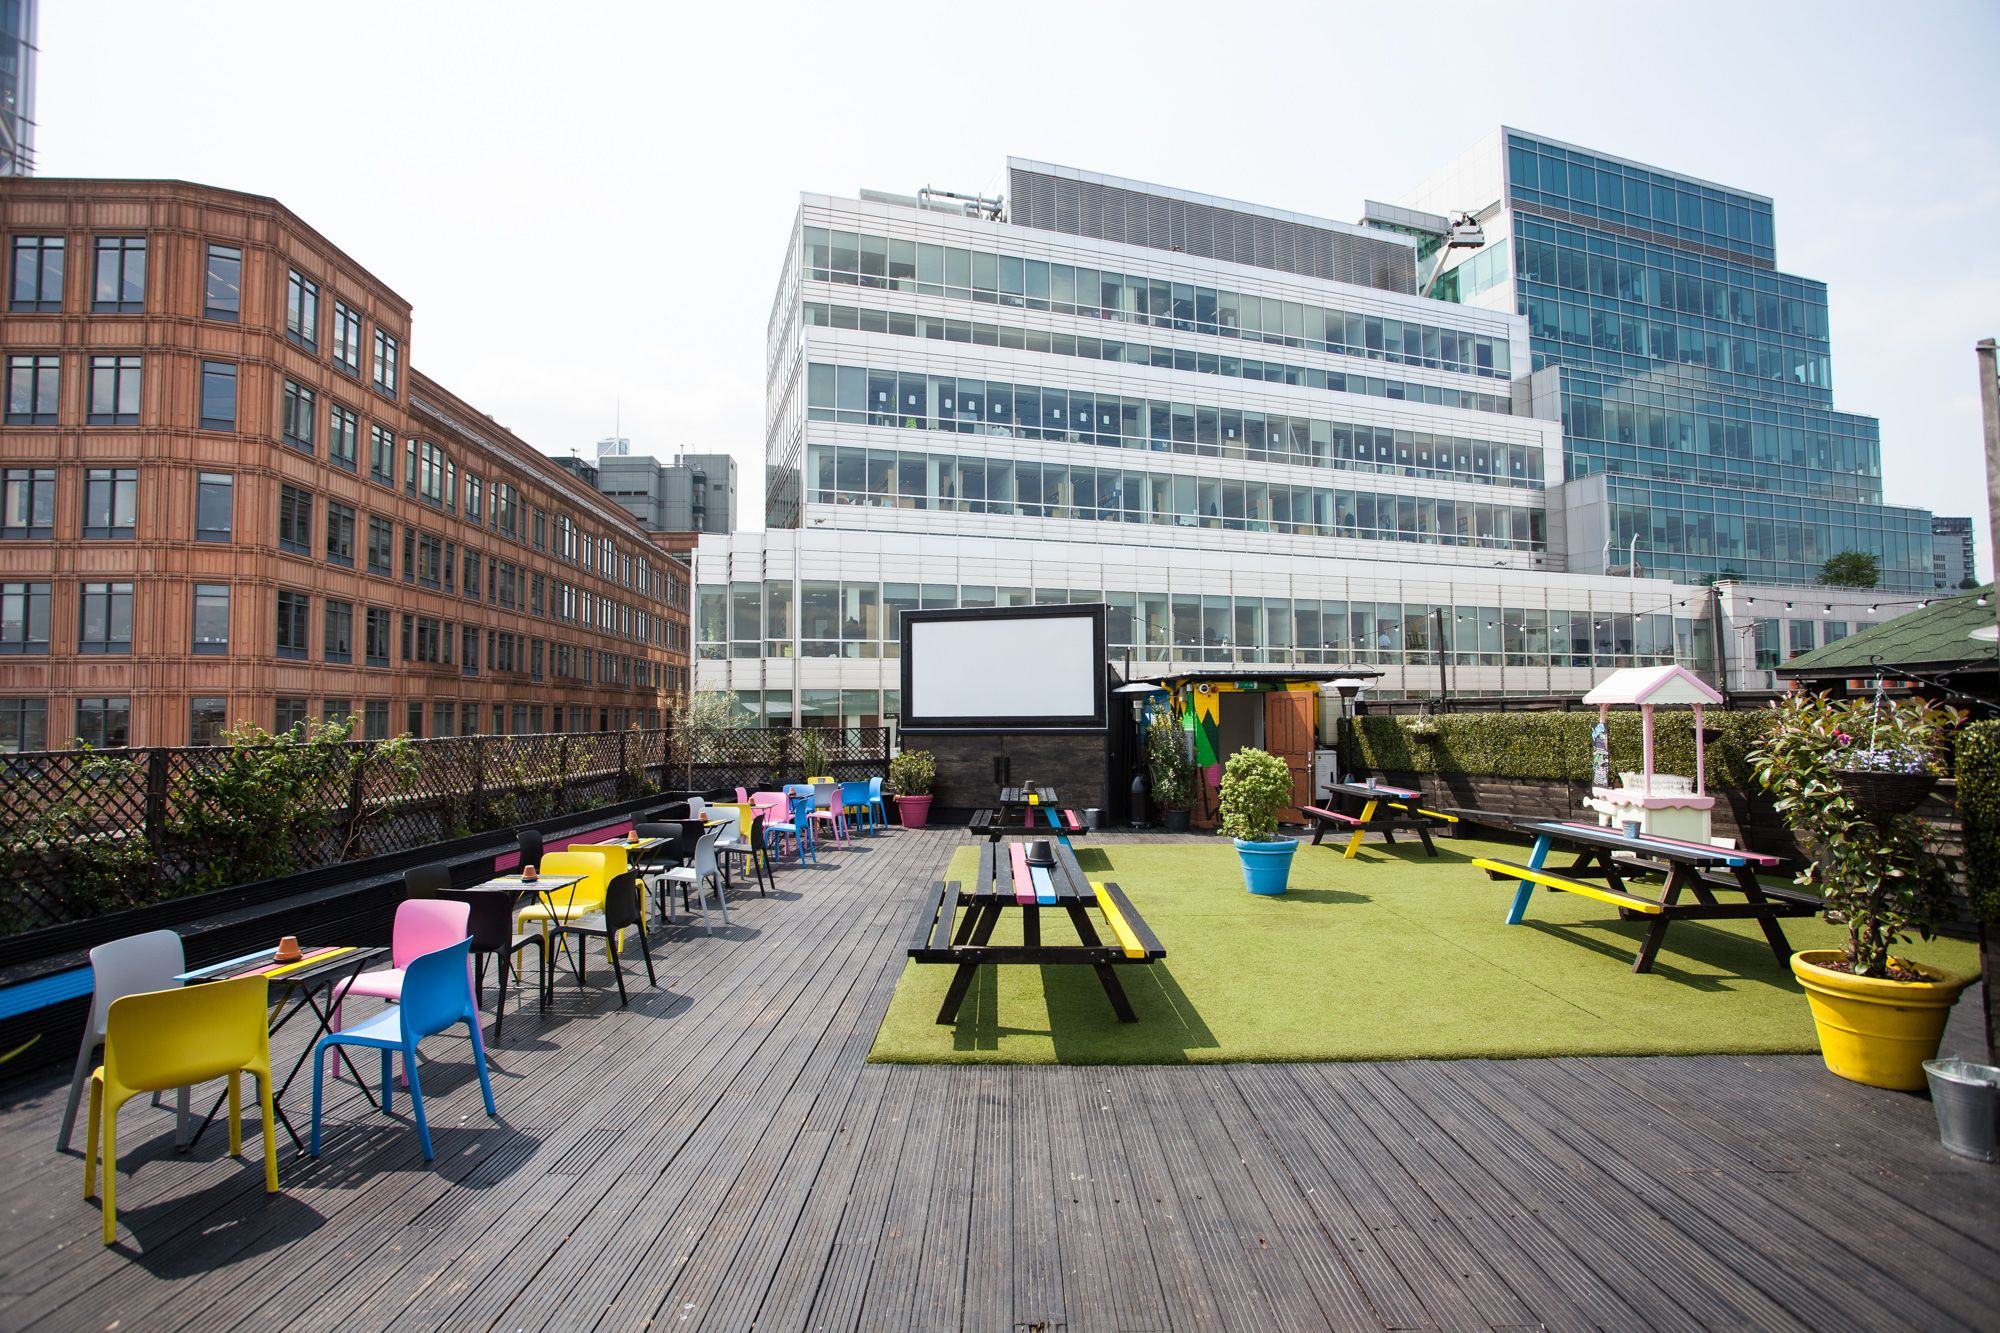 Top 10 Budget Rooftop Bars in London